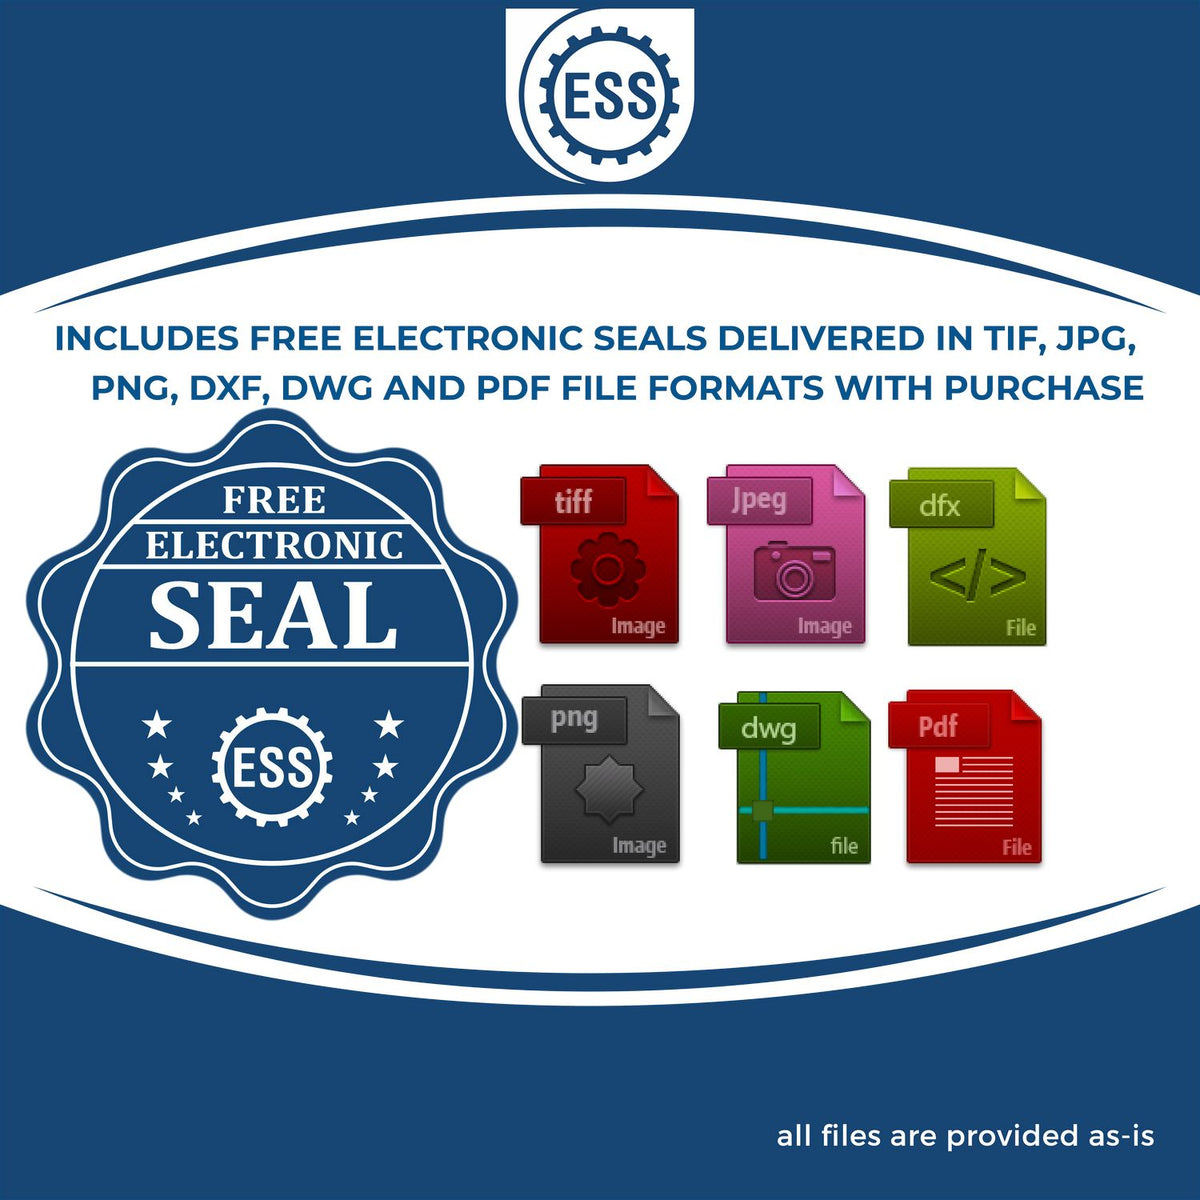 An infographic for the free electronic seal for the Hybrid Alabama Engineer Seal illustrating the different file type icons such as DXF, DWG, TIF, JPG and PNG.